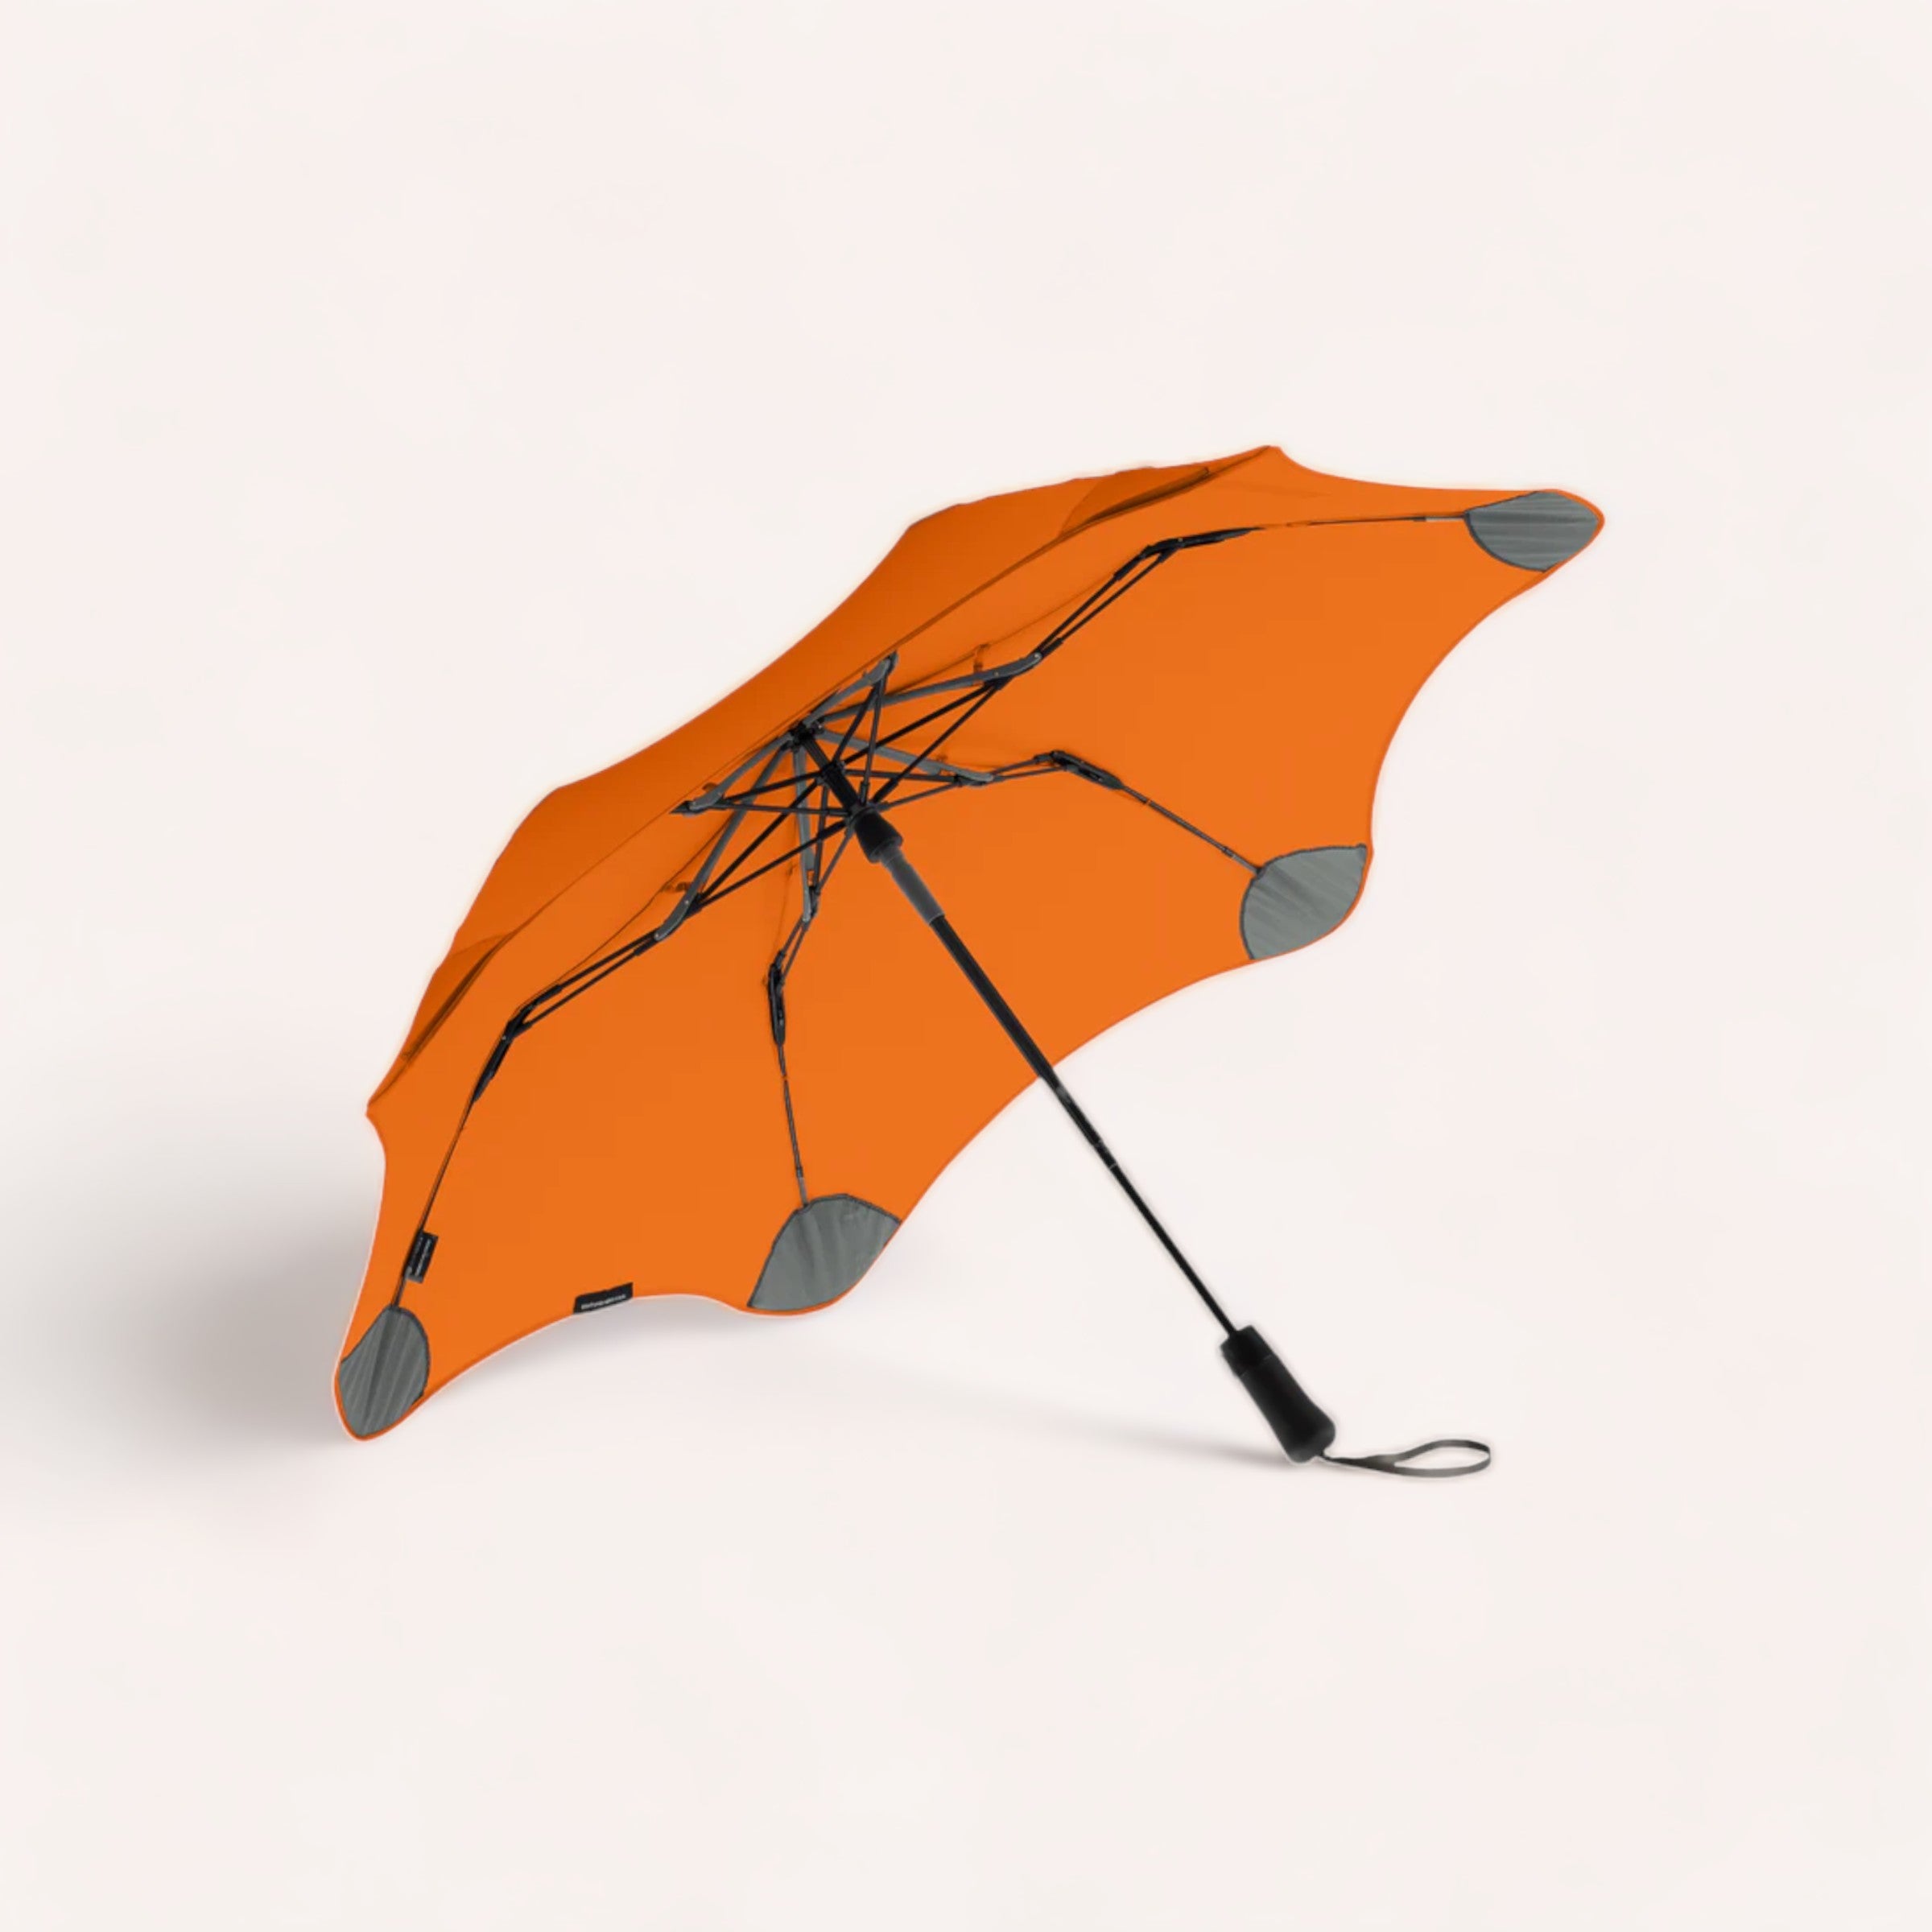 A bright orange BLUNT Metro umbrella turned inside out against a white background, likely depicting a windy day scenario for an urban dweller.